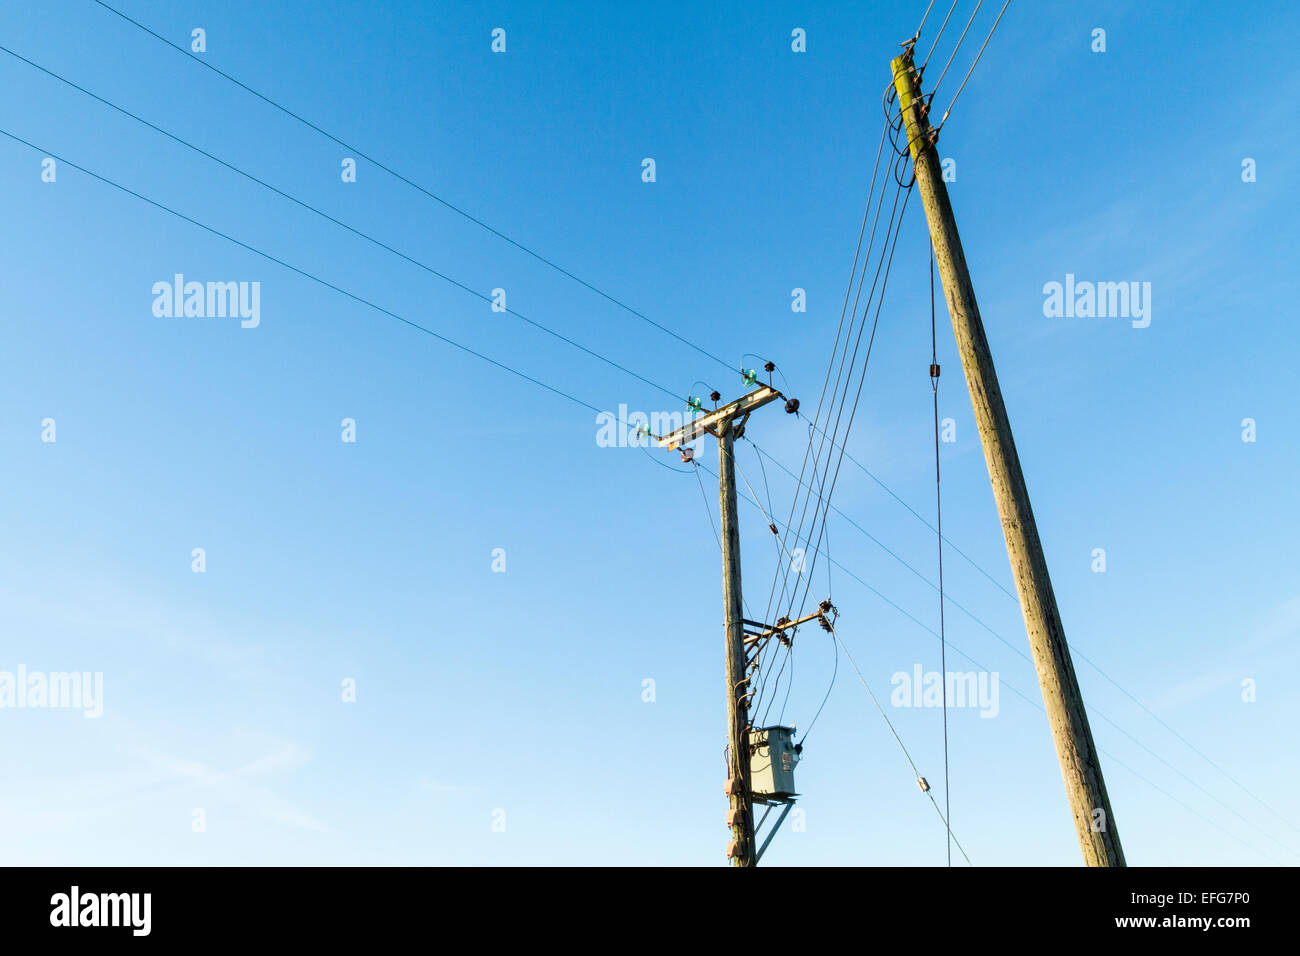 Overhead electricity power lines supported by wooden utility poles, Nottinghamshire, England, UK Stock Photo